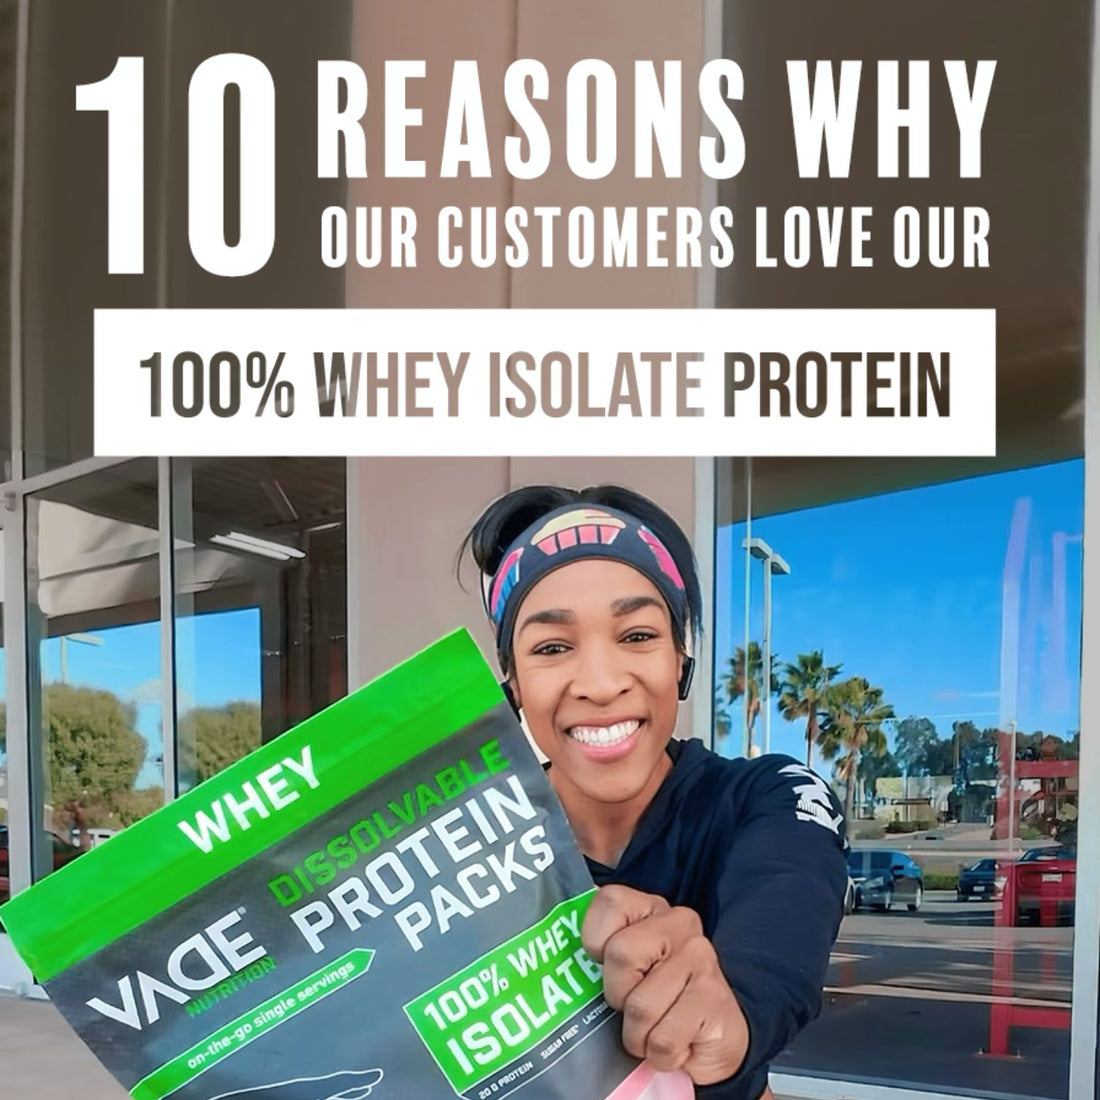 10 Reasons why our customers love our 100% Whey Isolate Protein